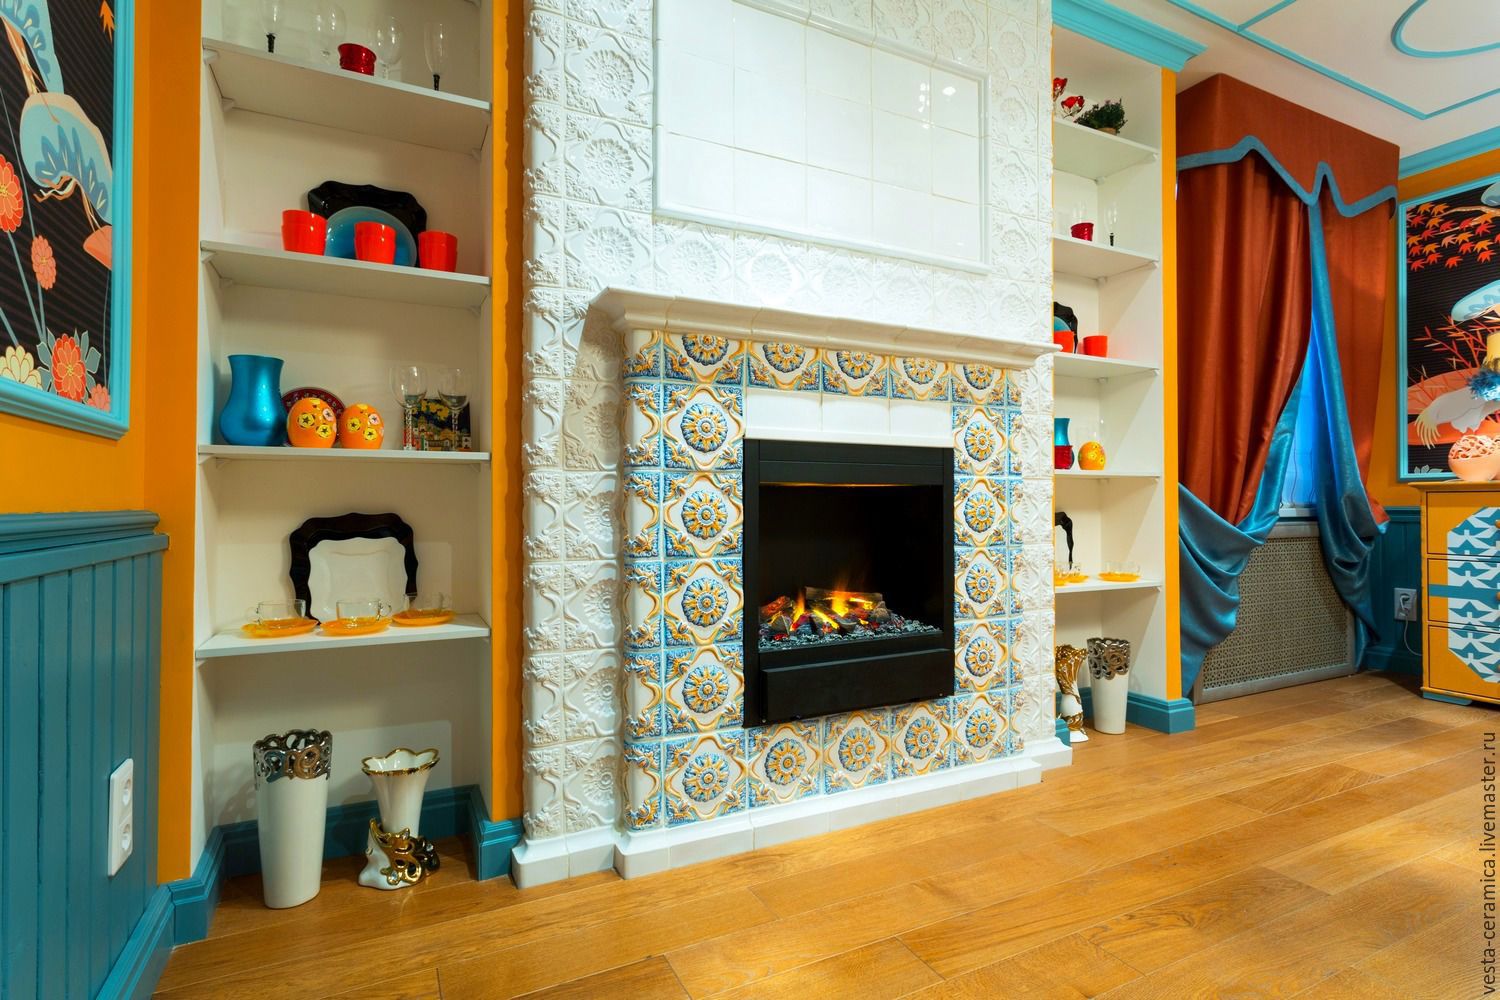 Fireplace Ceramic Tile Awesome Tiled Fireplace